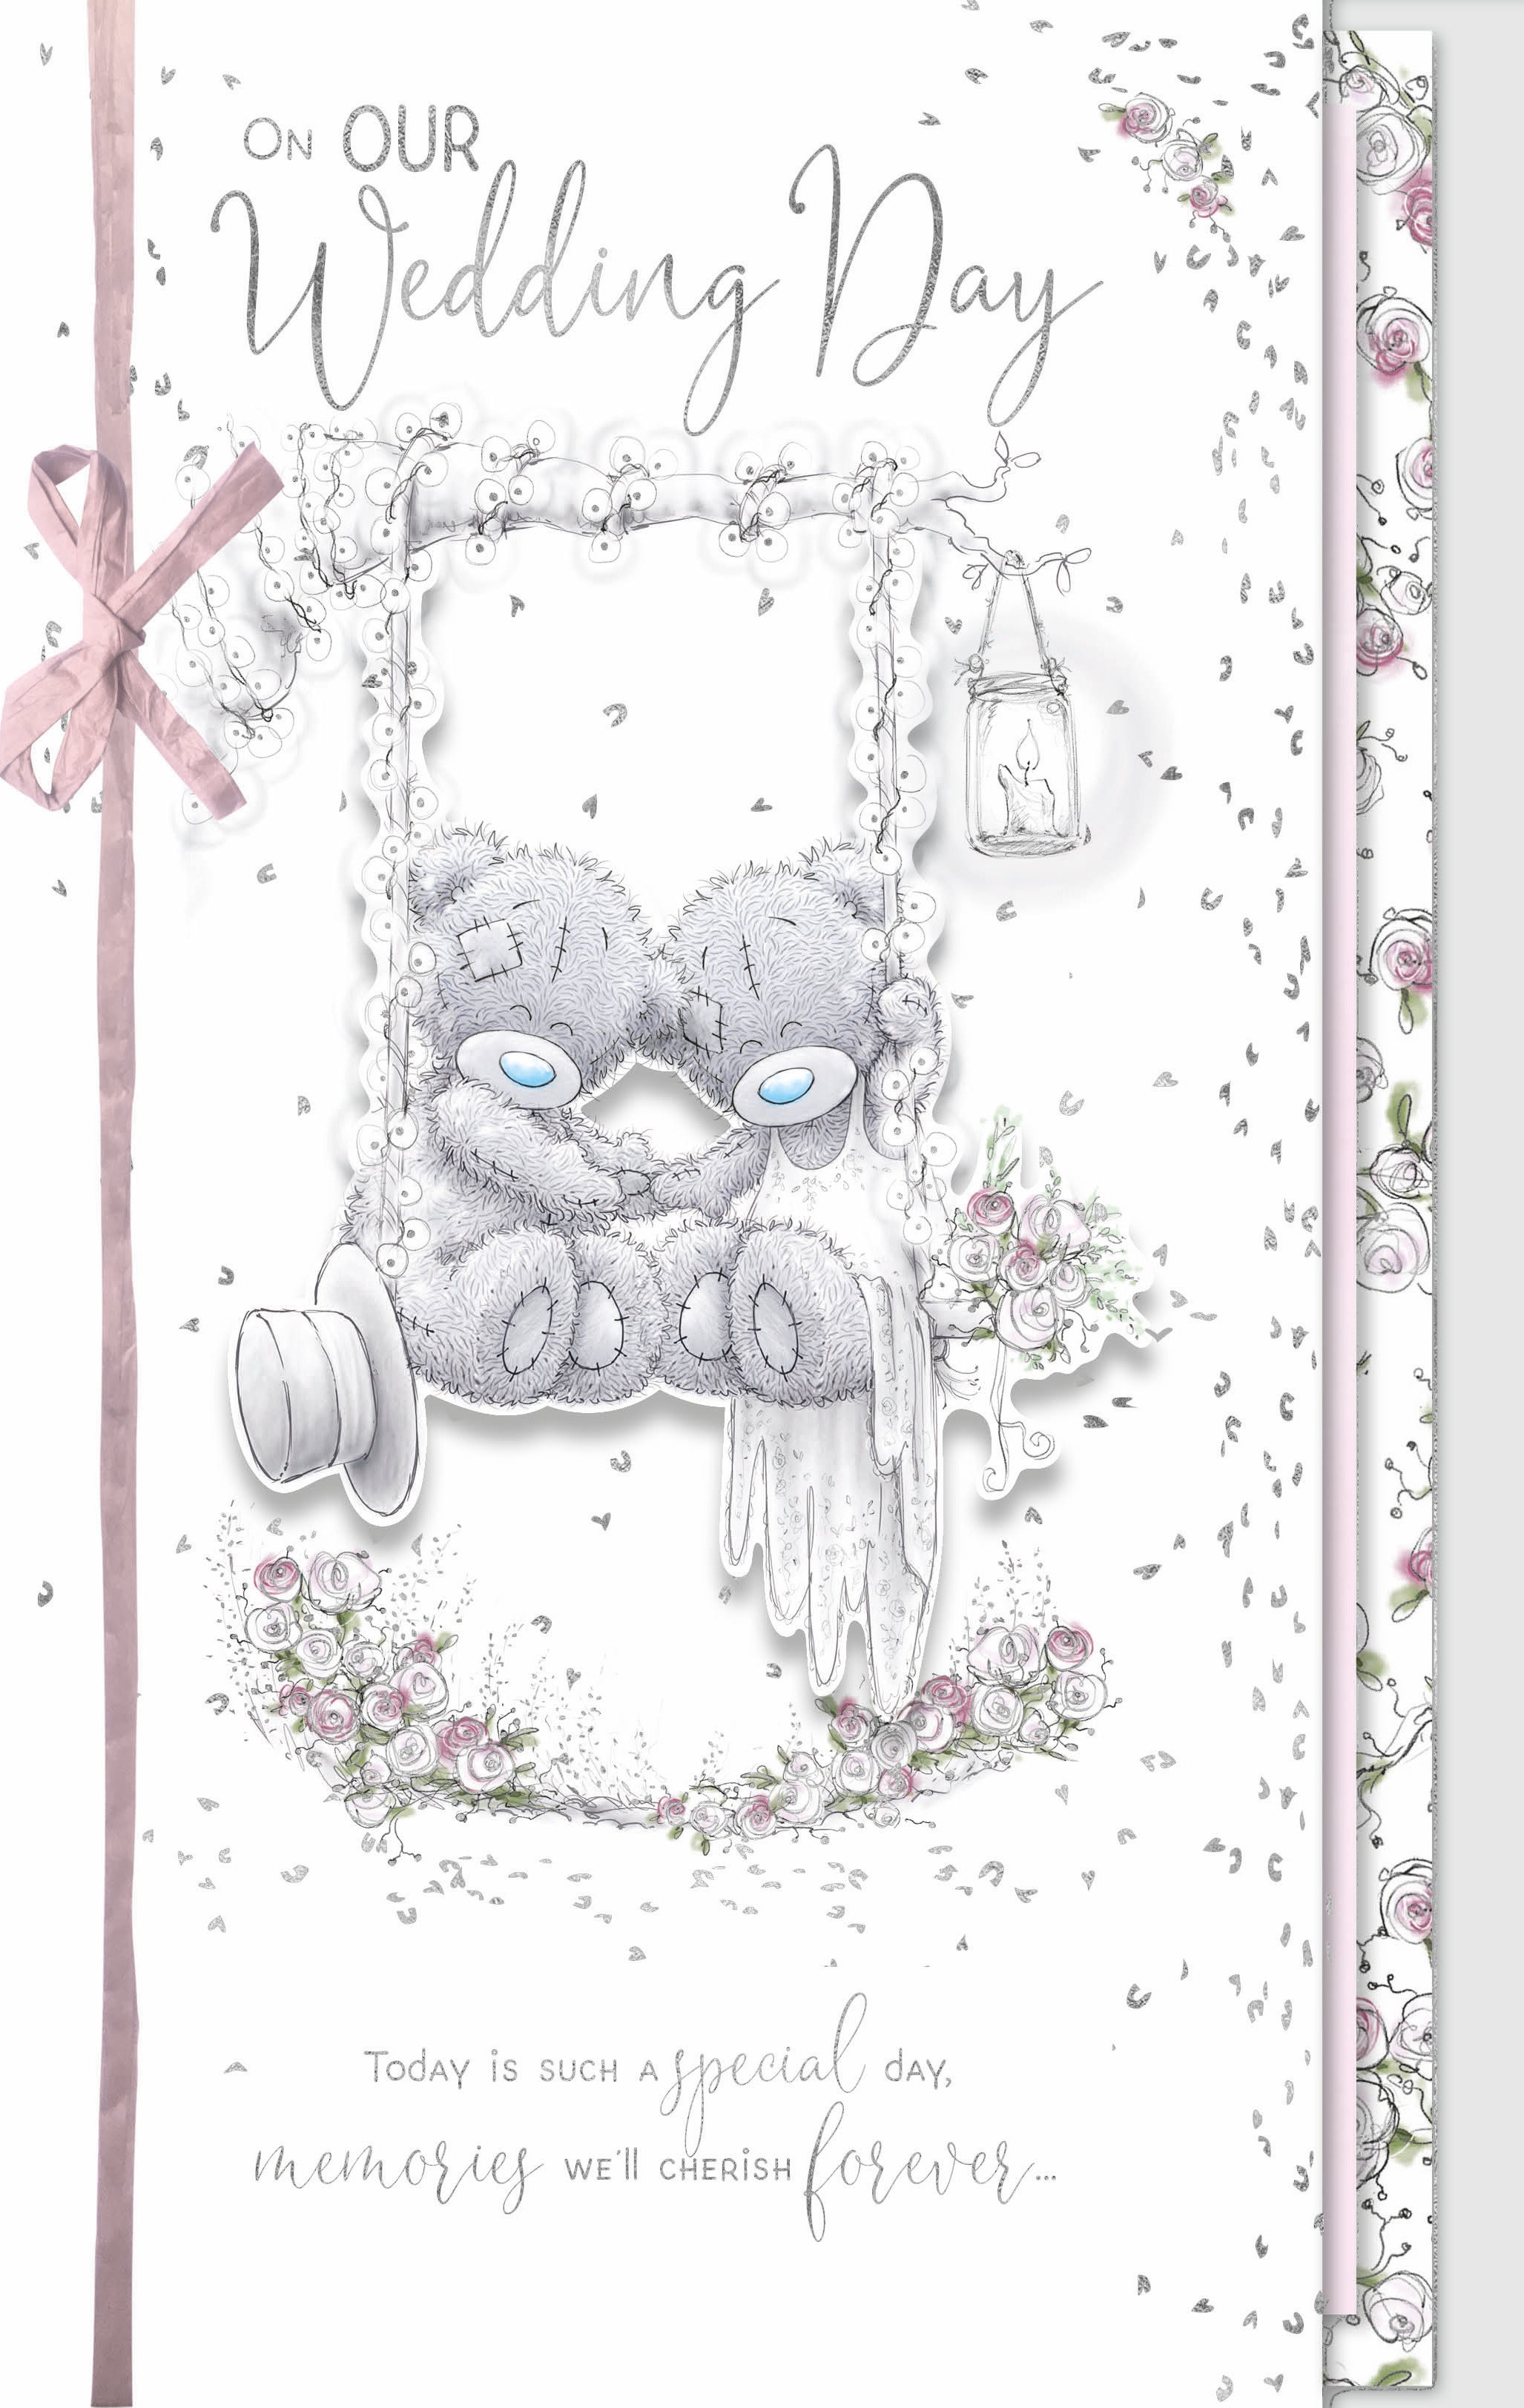 On Our Wedding Day Card - Bears On Swing